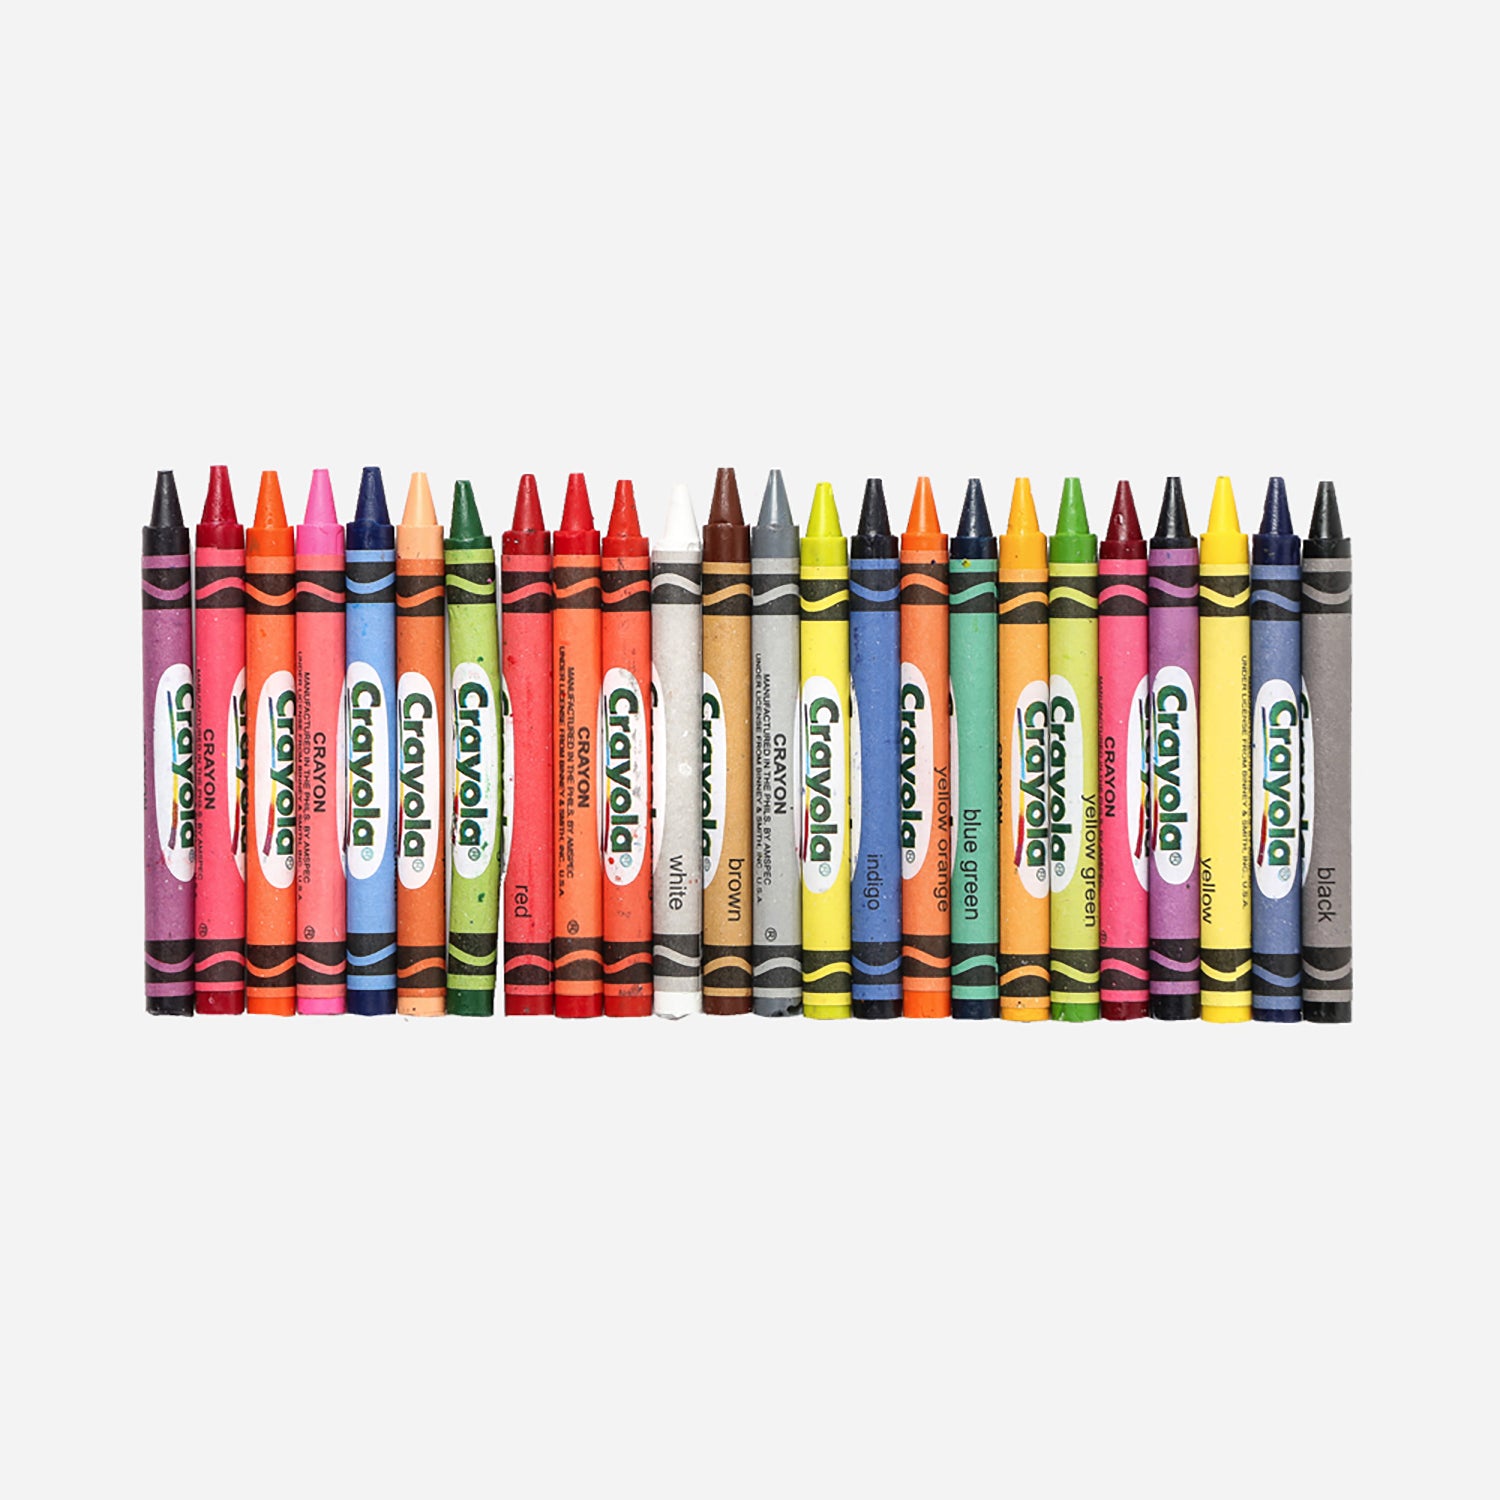 4, 16, and 24 Count Crayola Washable Crayons: What's Inside the